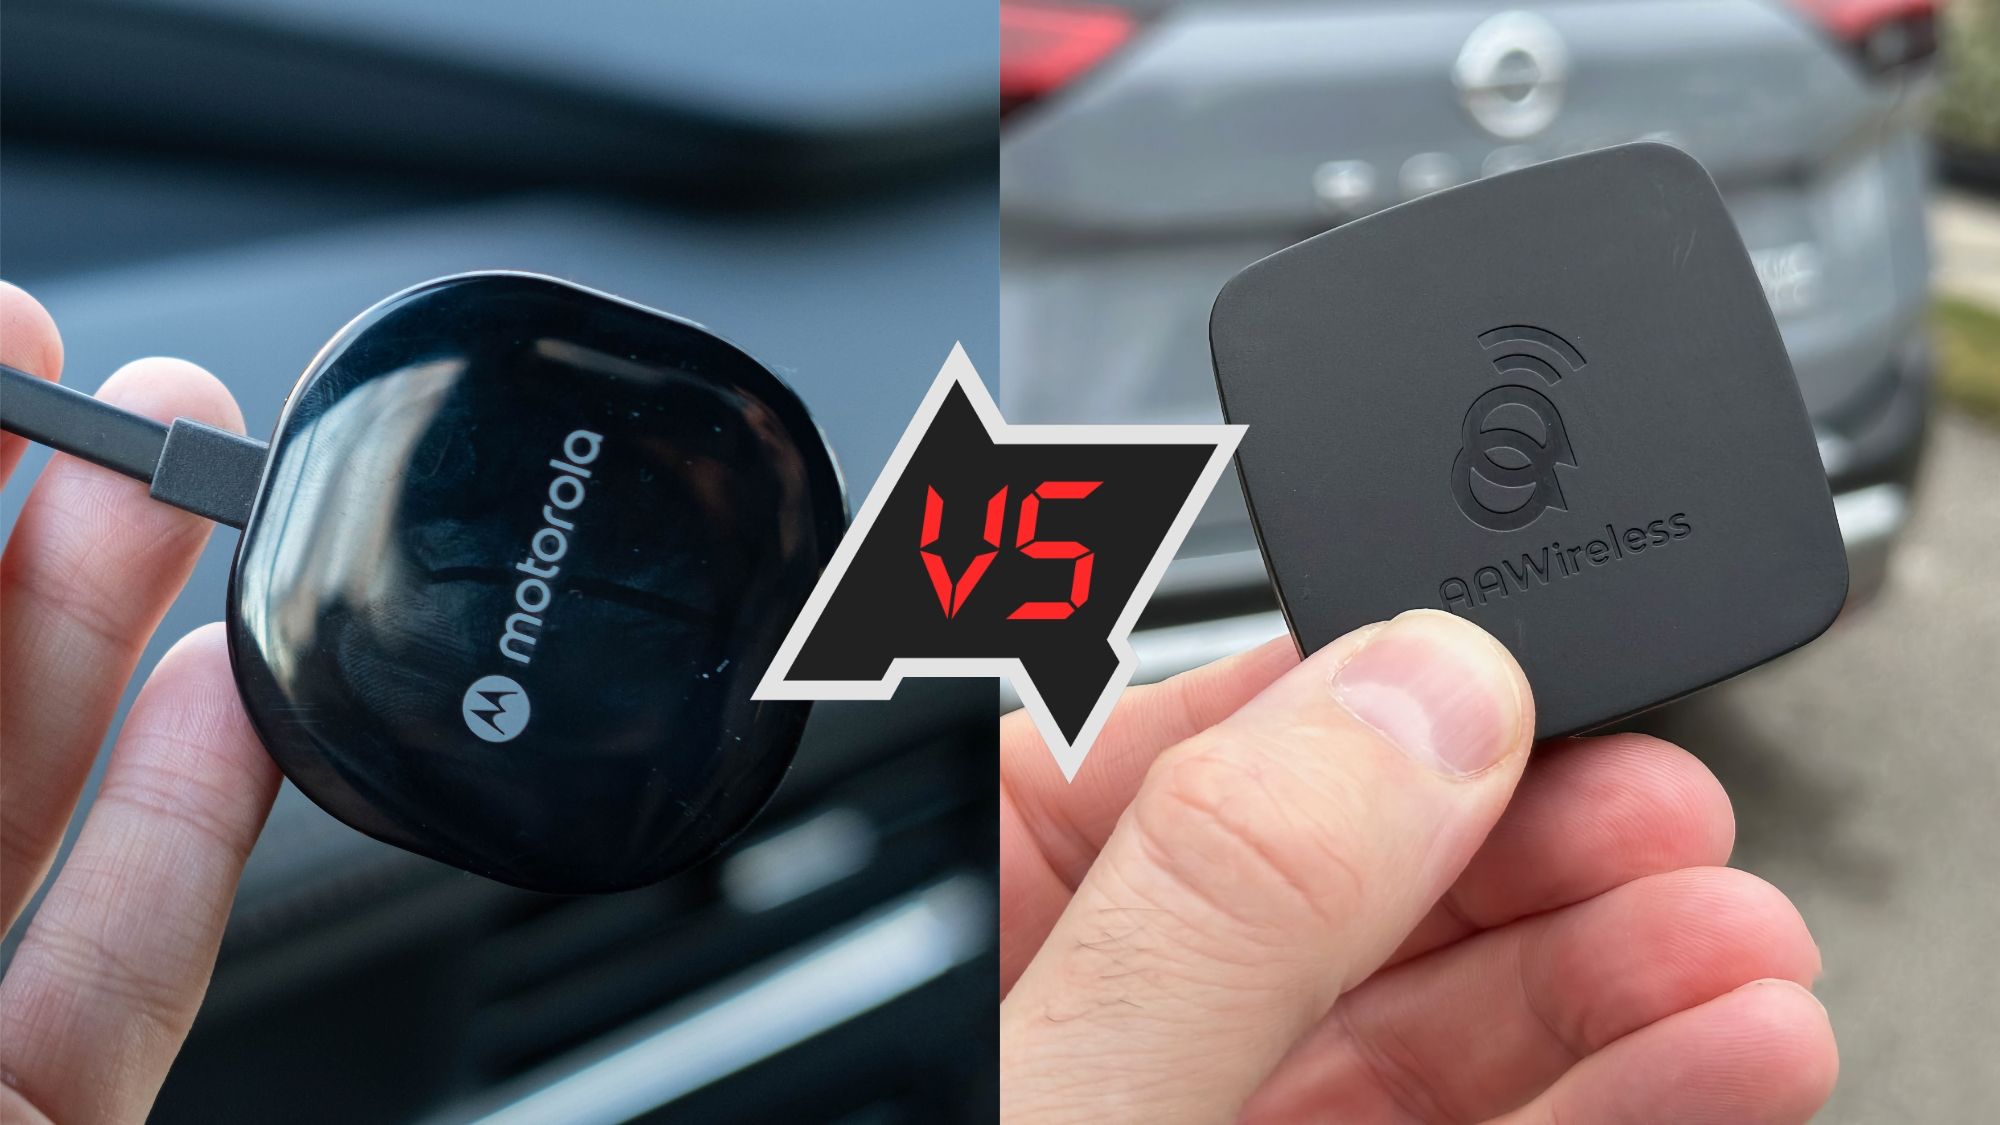 Motorola MA1 wireless Android Auto adapter announced for the Europe and UK  markets - Gizmochina